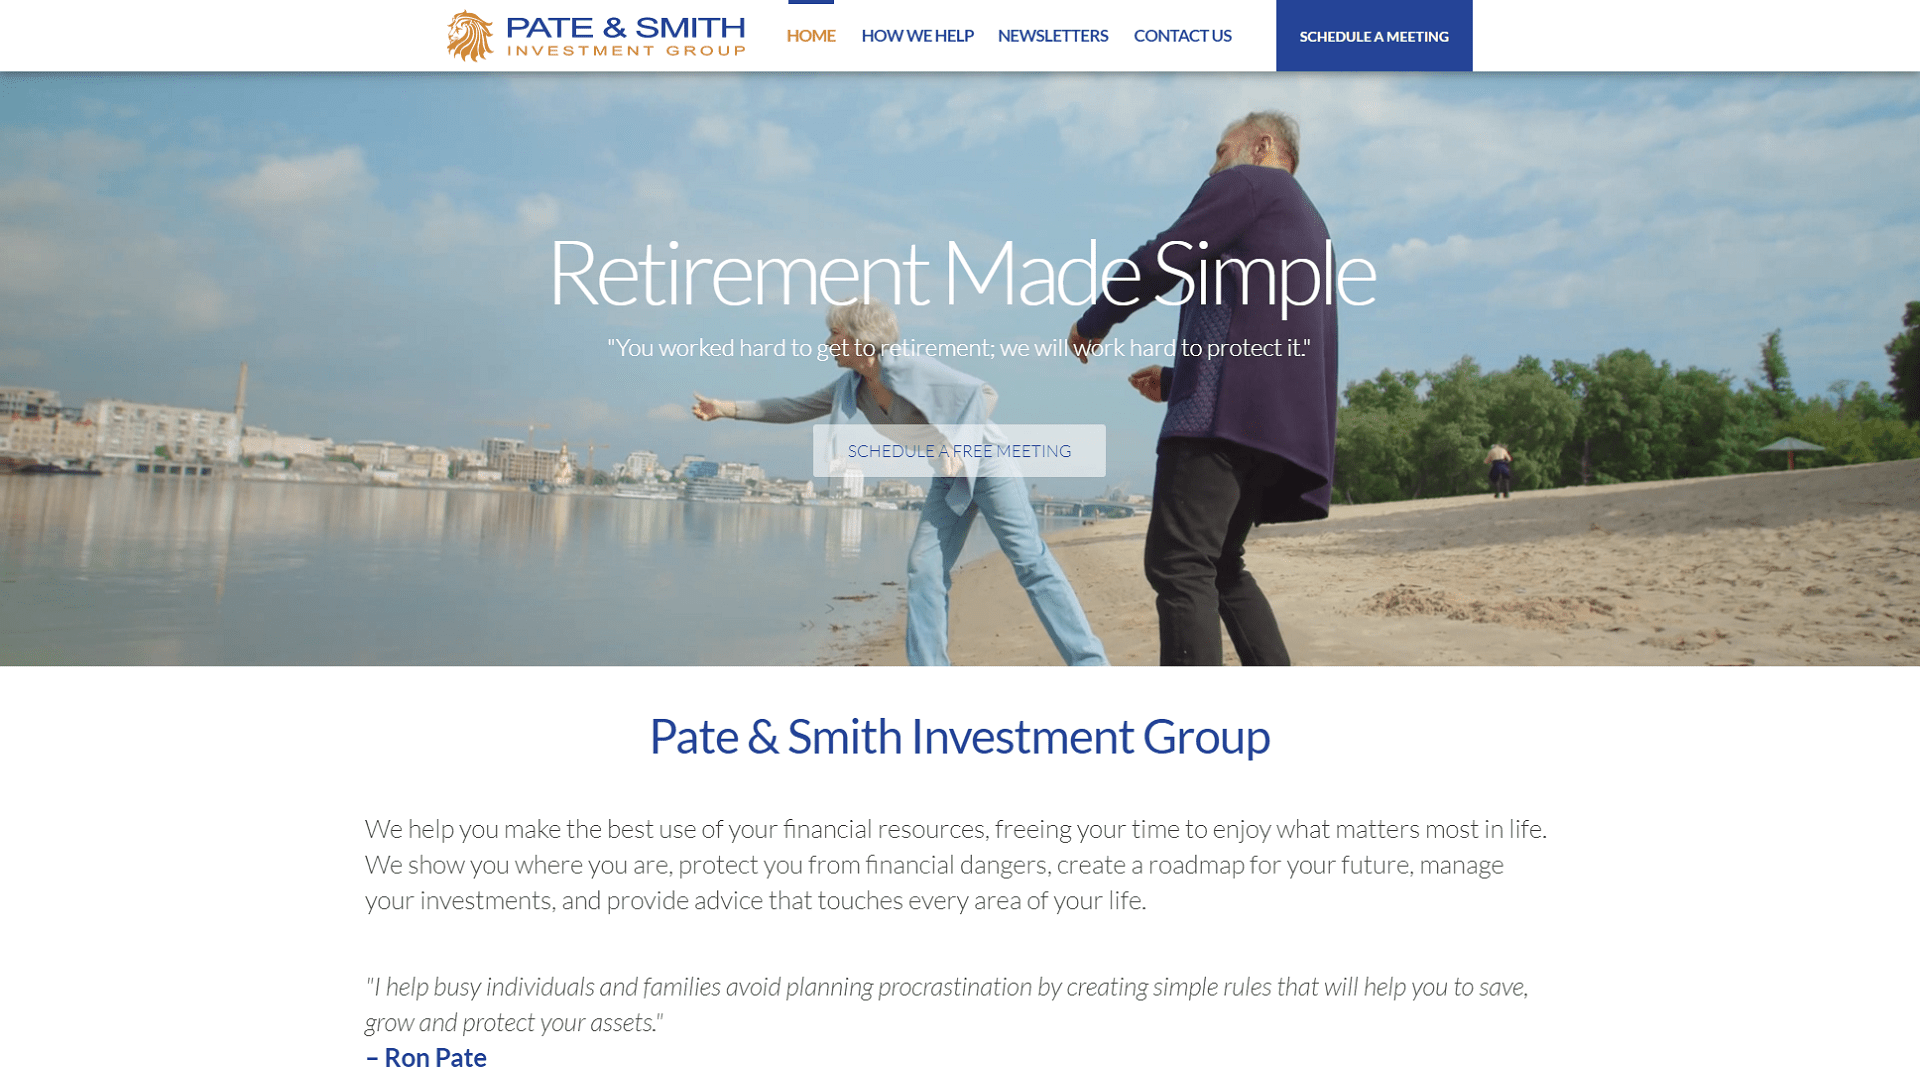 Pate & Smith Investment Group